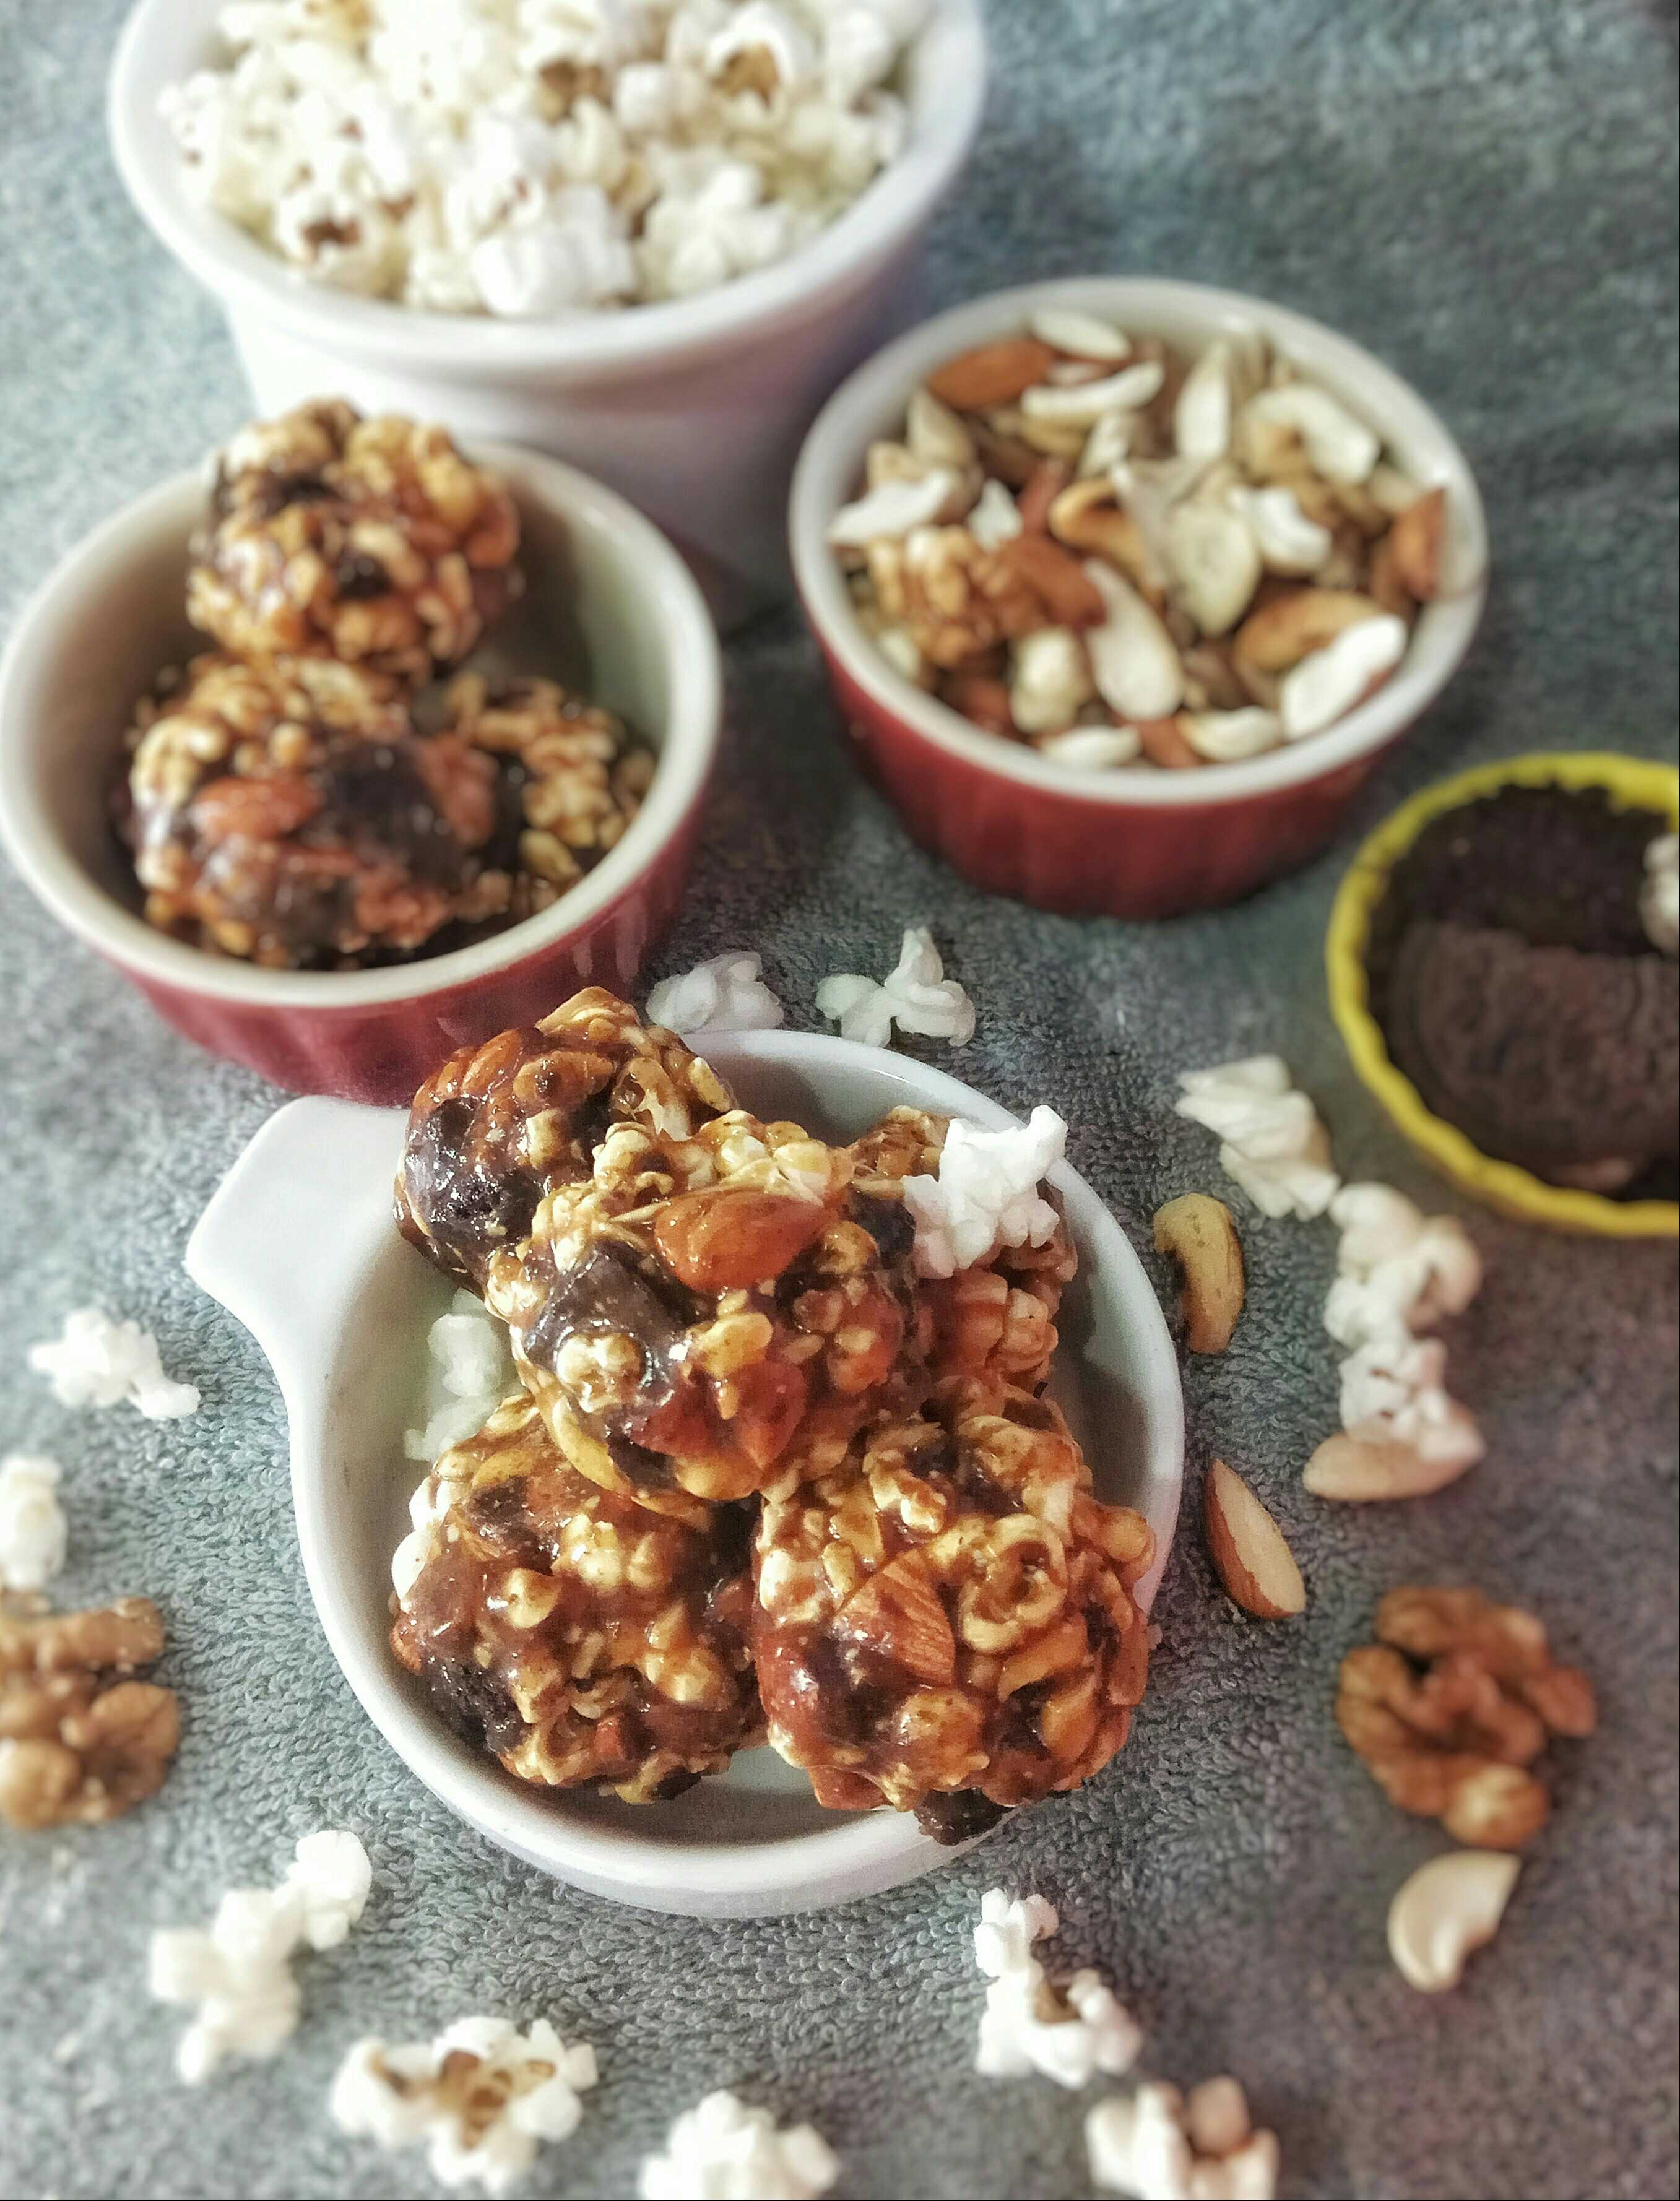 Dry Fruits,Pop Corn And Butterscotch Laddoo